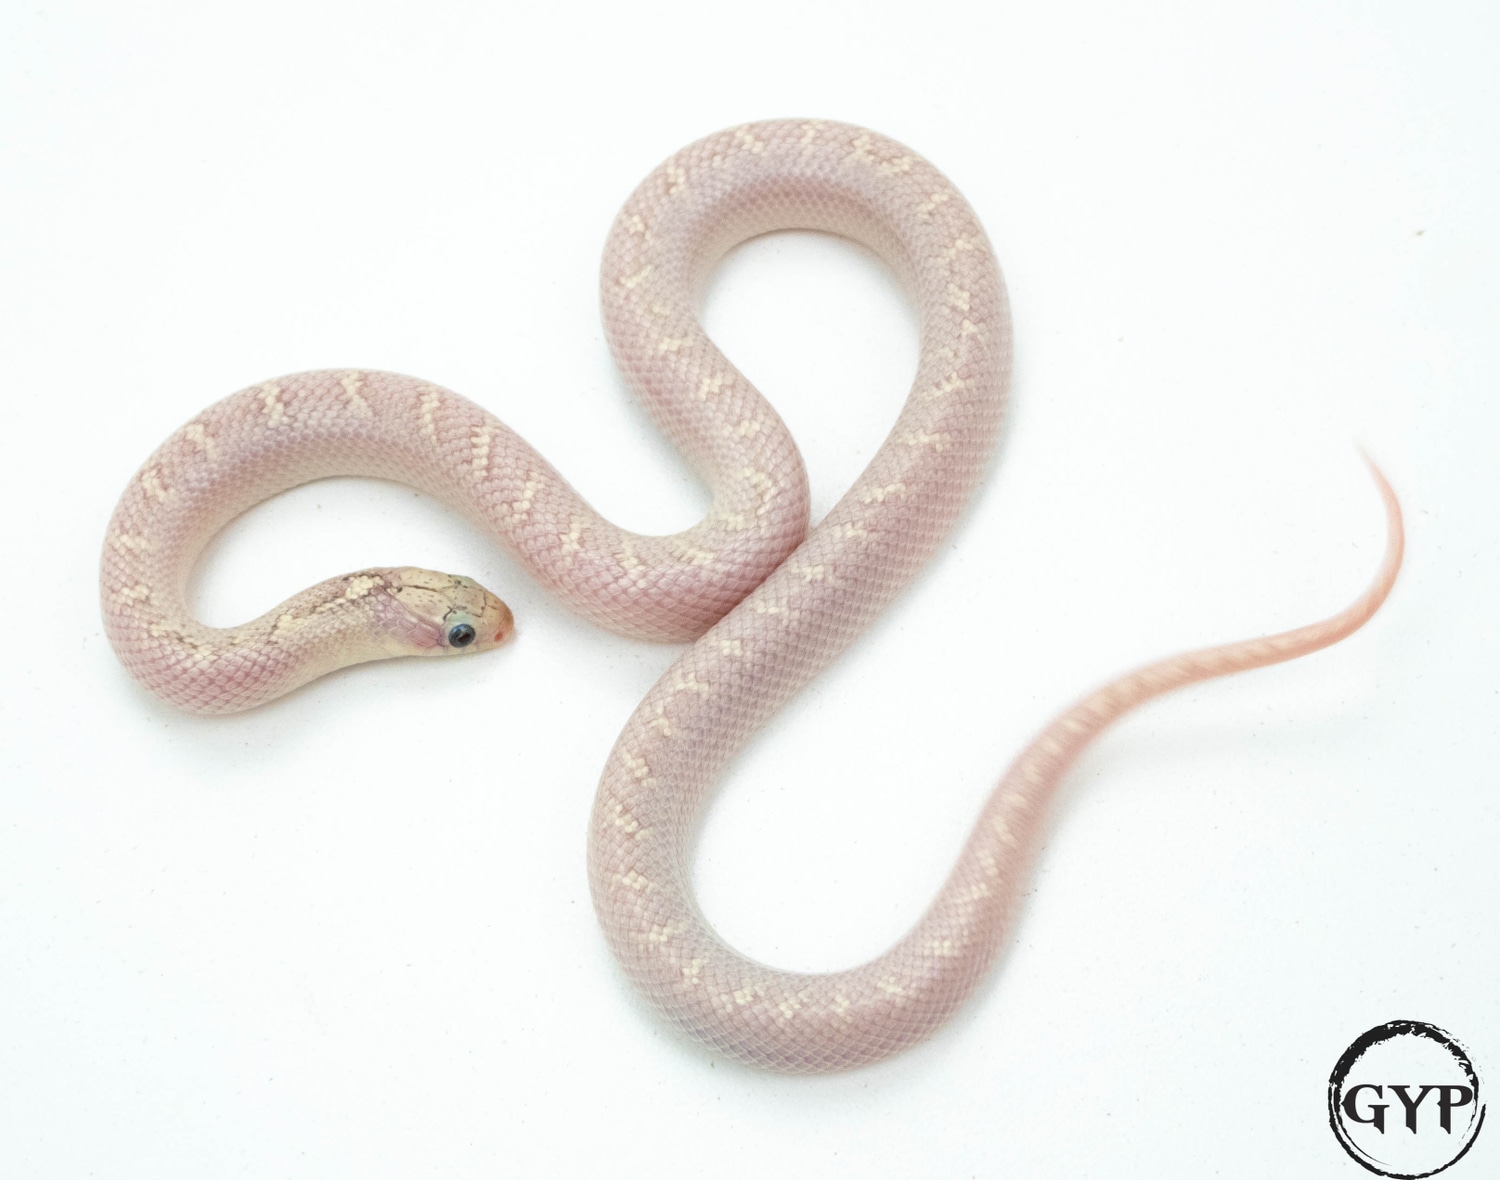 White-sided Hypo Het Axanthic Florida Kingsnake by Gopher Your Pet